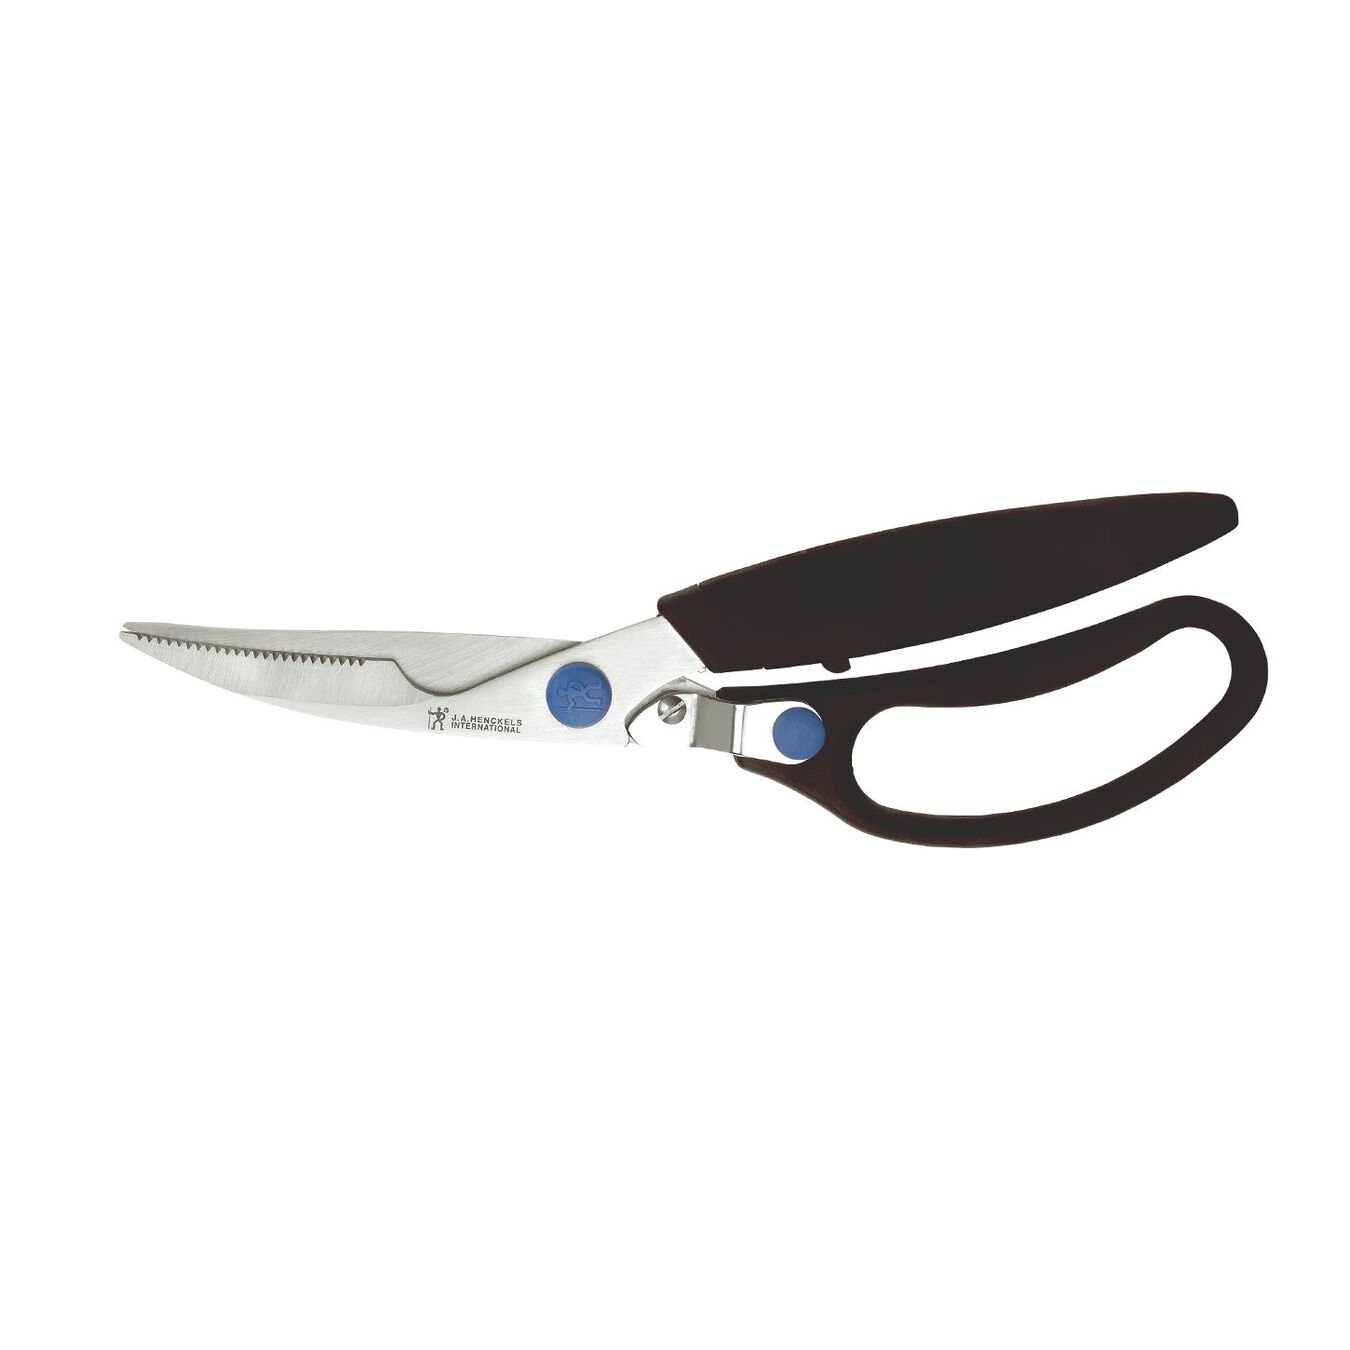 Poultry Shears - 9.75"